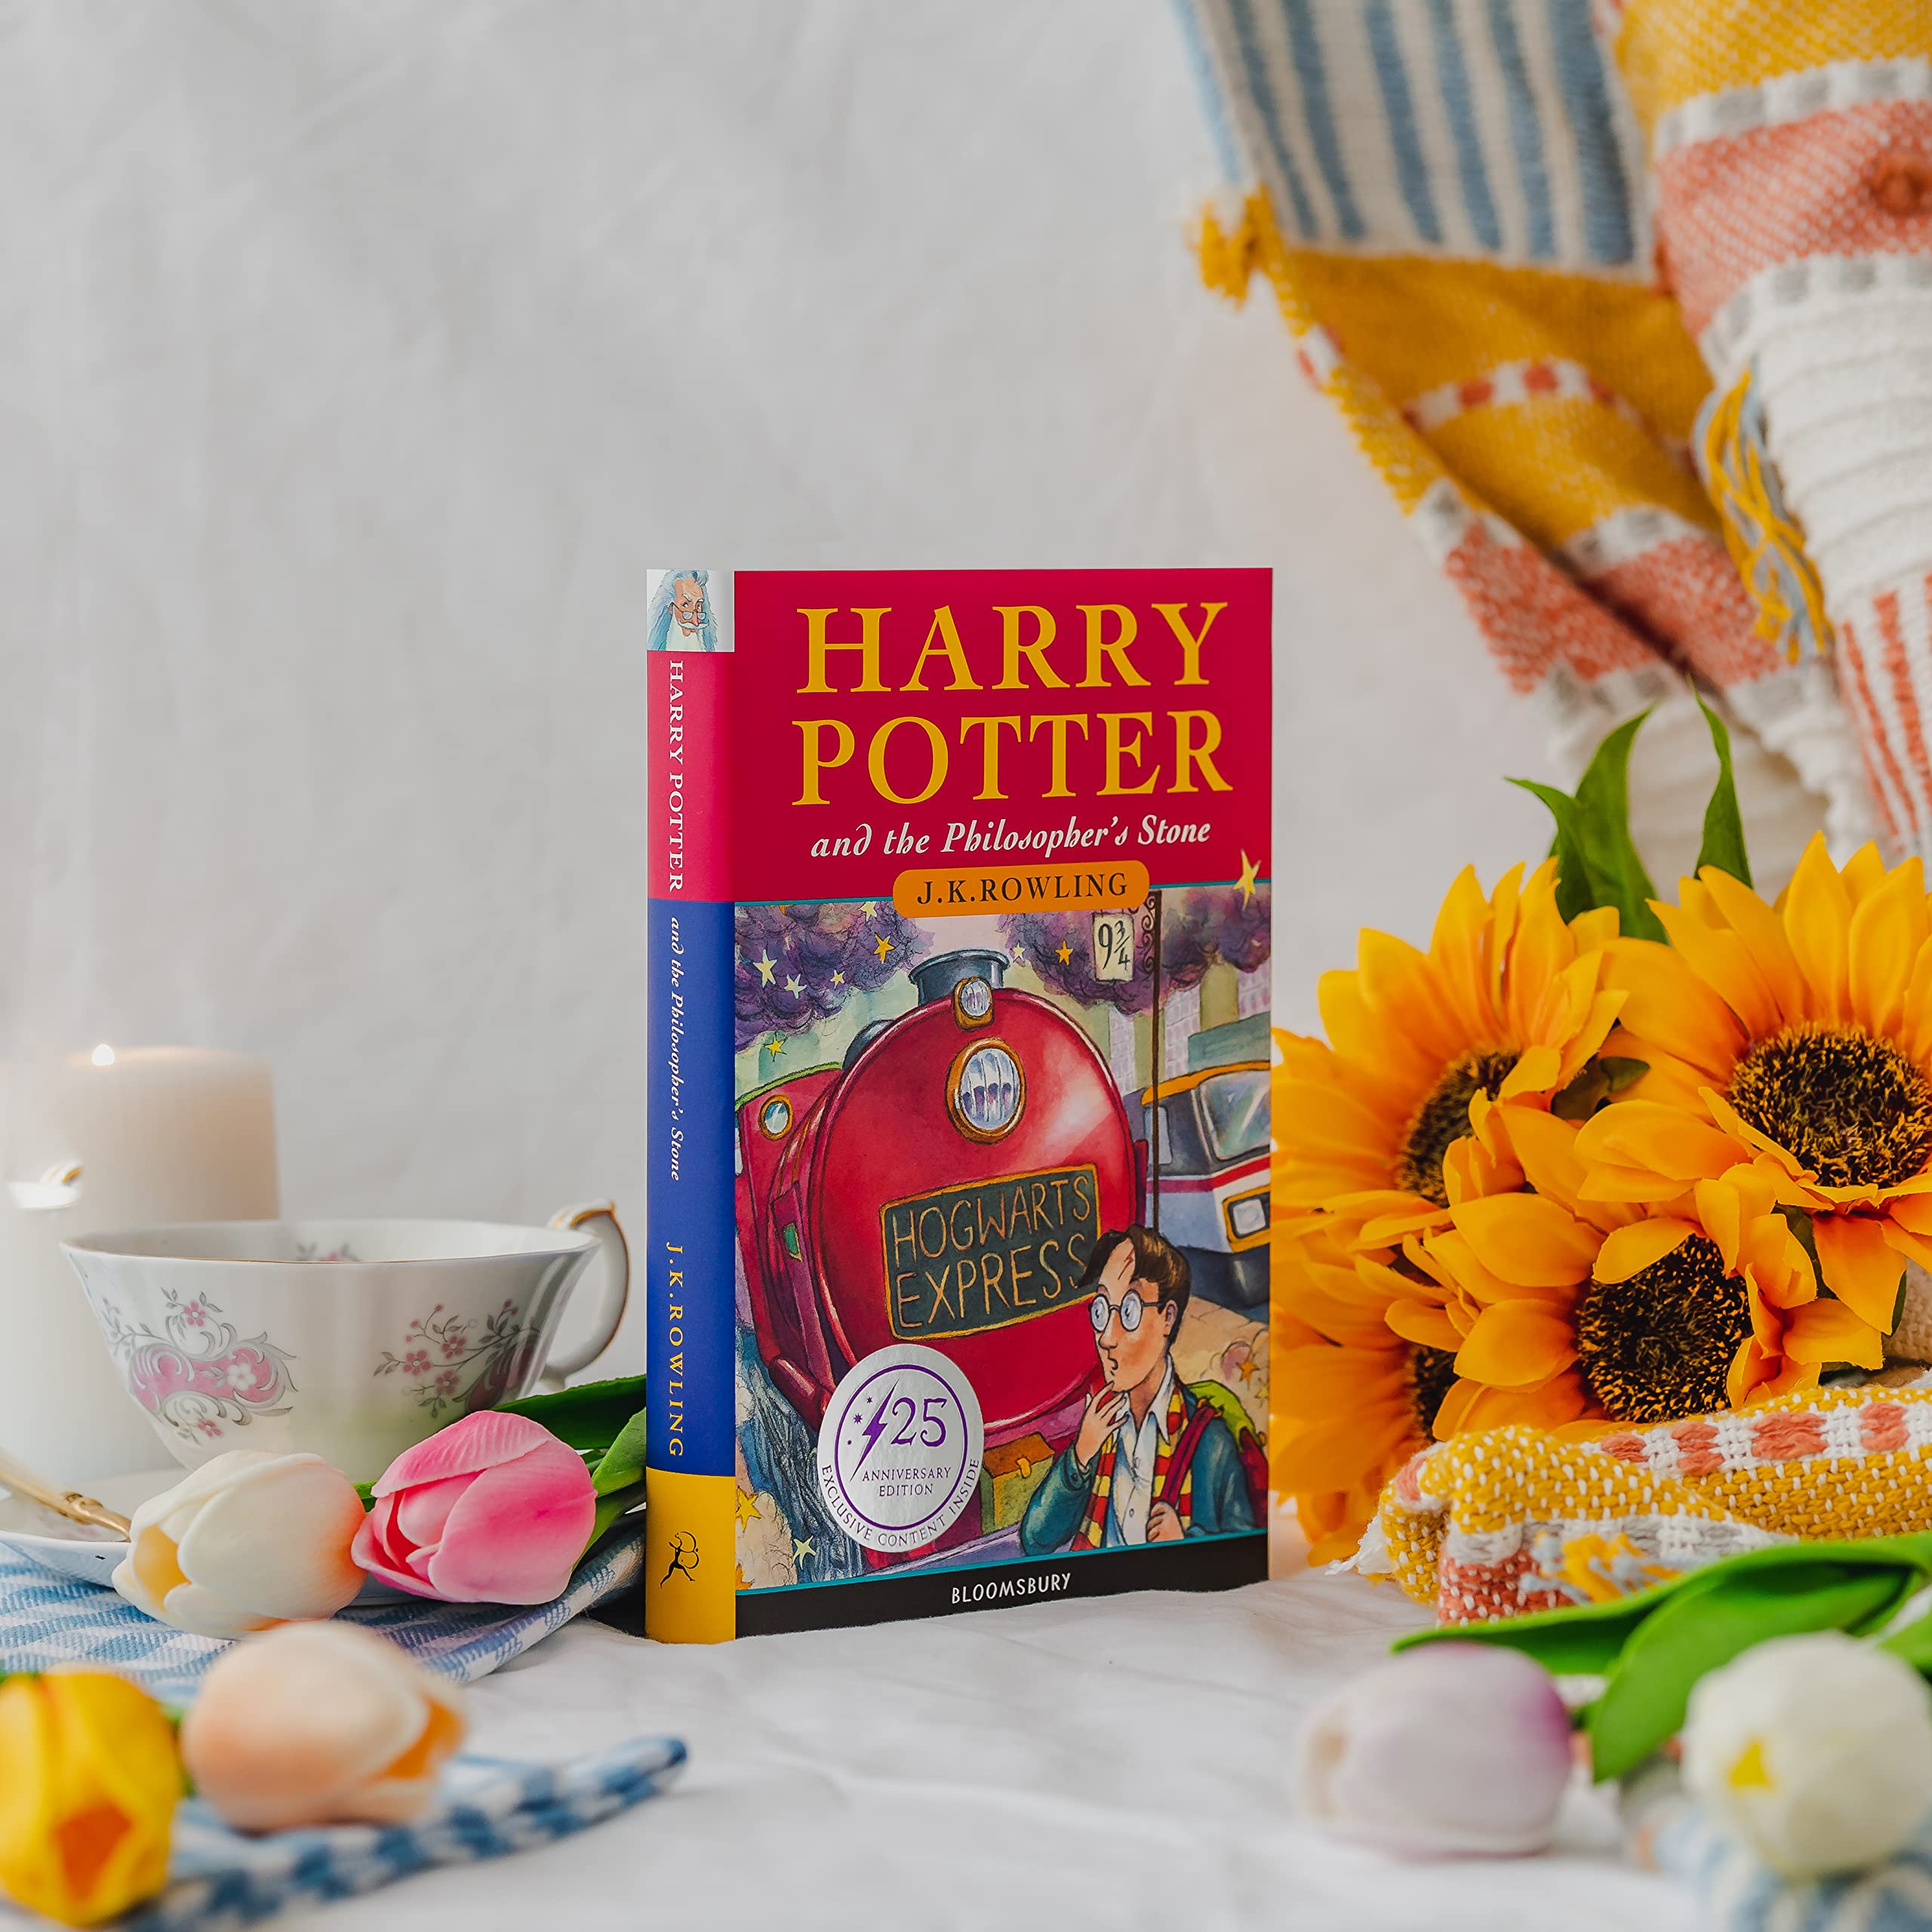 Harry Potter and the Philosopher’s Stone – 25th Anniversary Edition